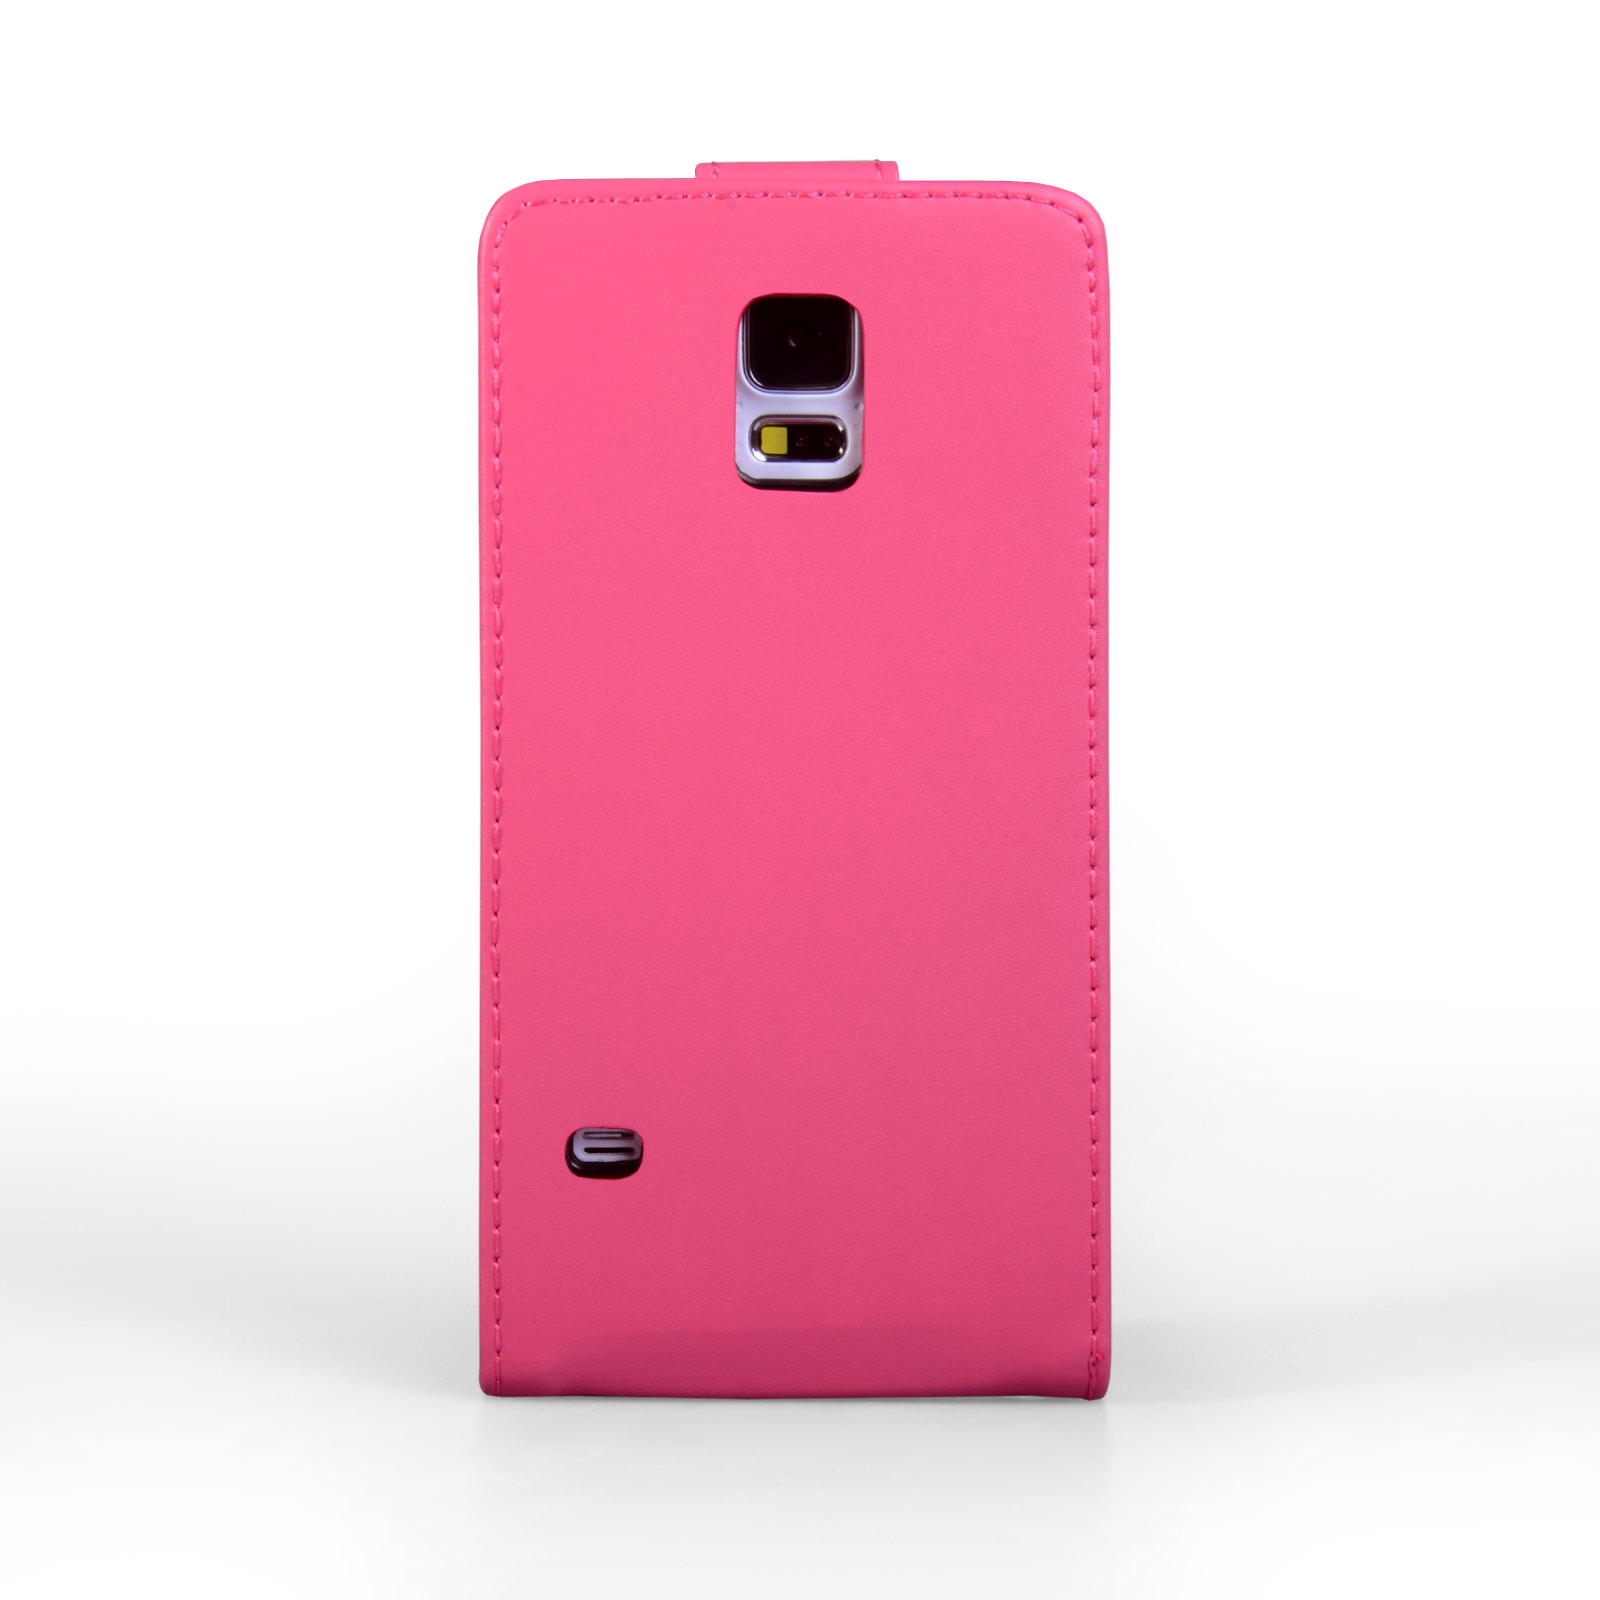 YouSave Samsung Galaxy S5 Leather-Effect Flip Case - Hot Pink